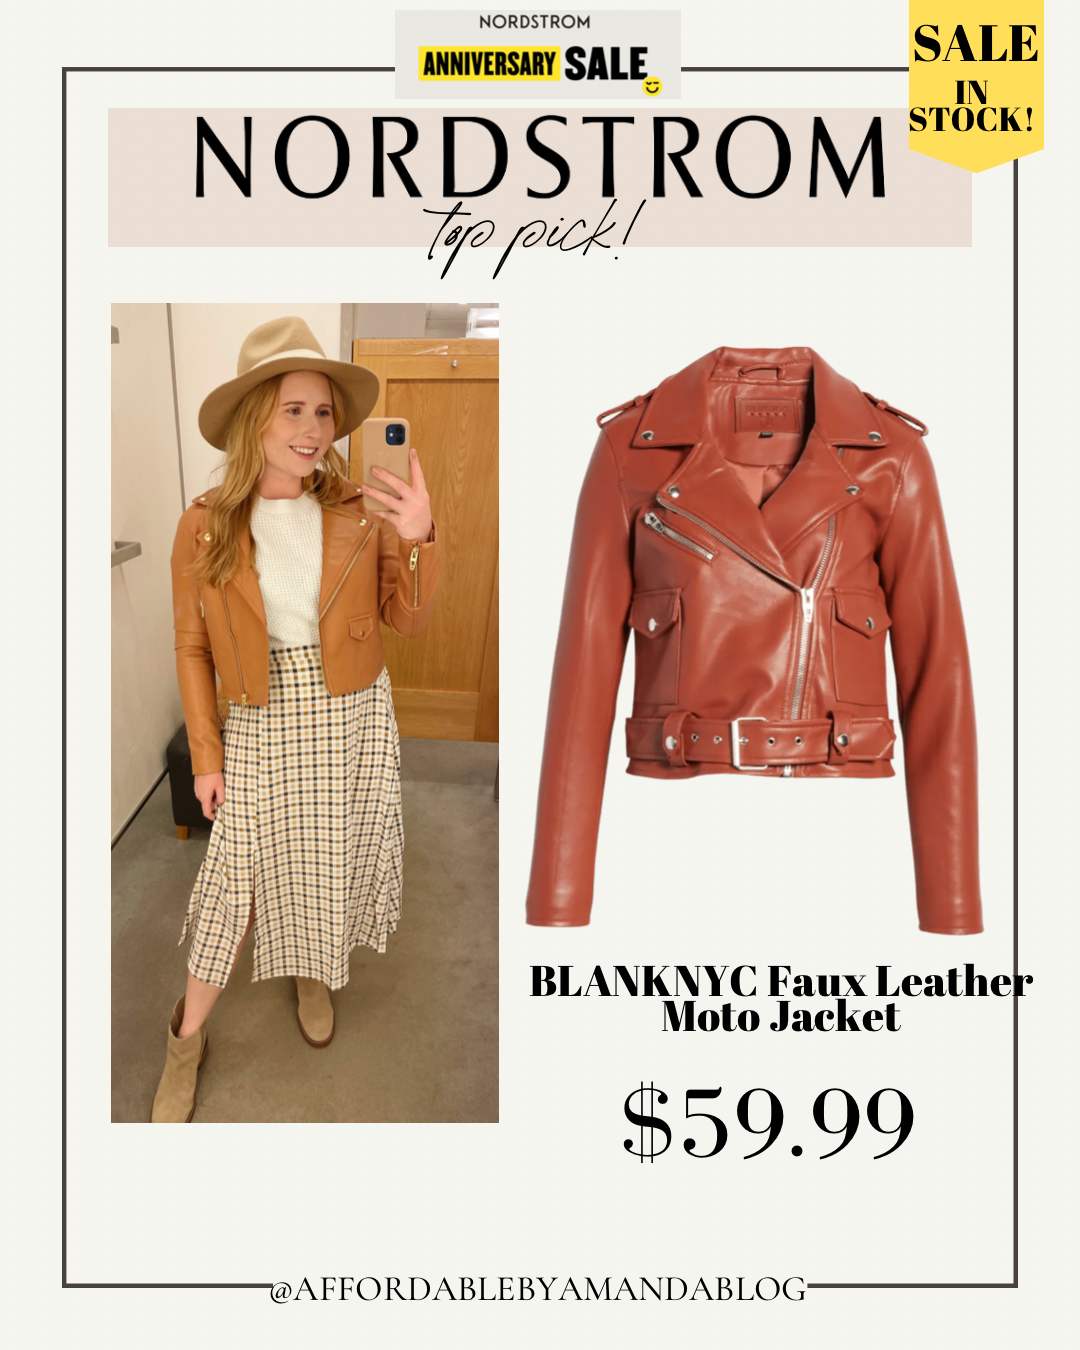 BLANKNYC Faux Leather Moto Jacket at Nordstrom.com